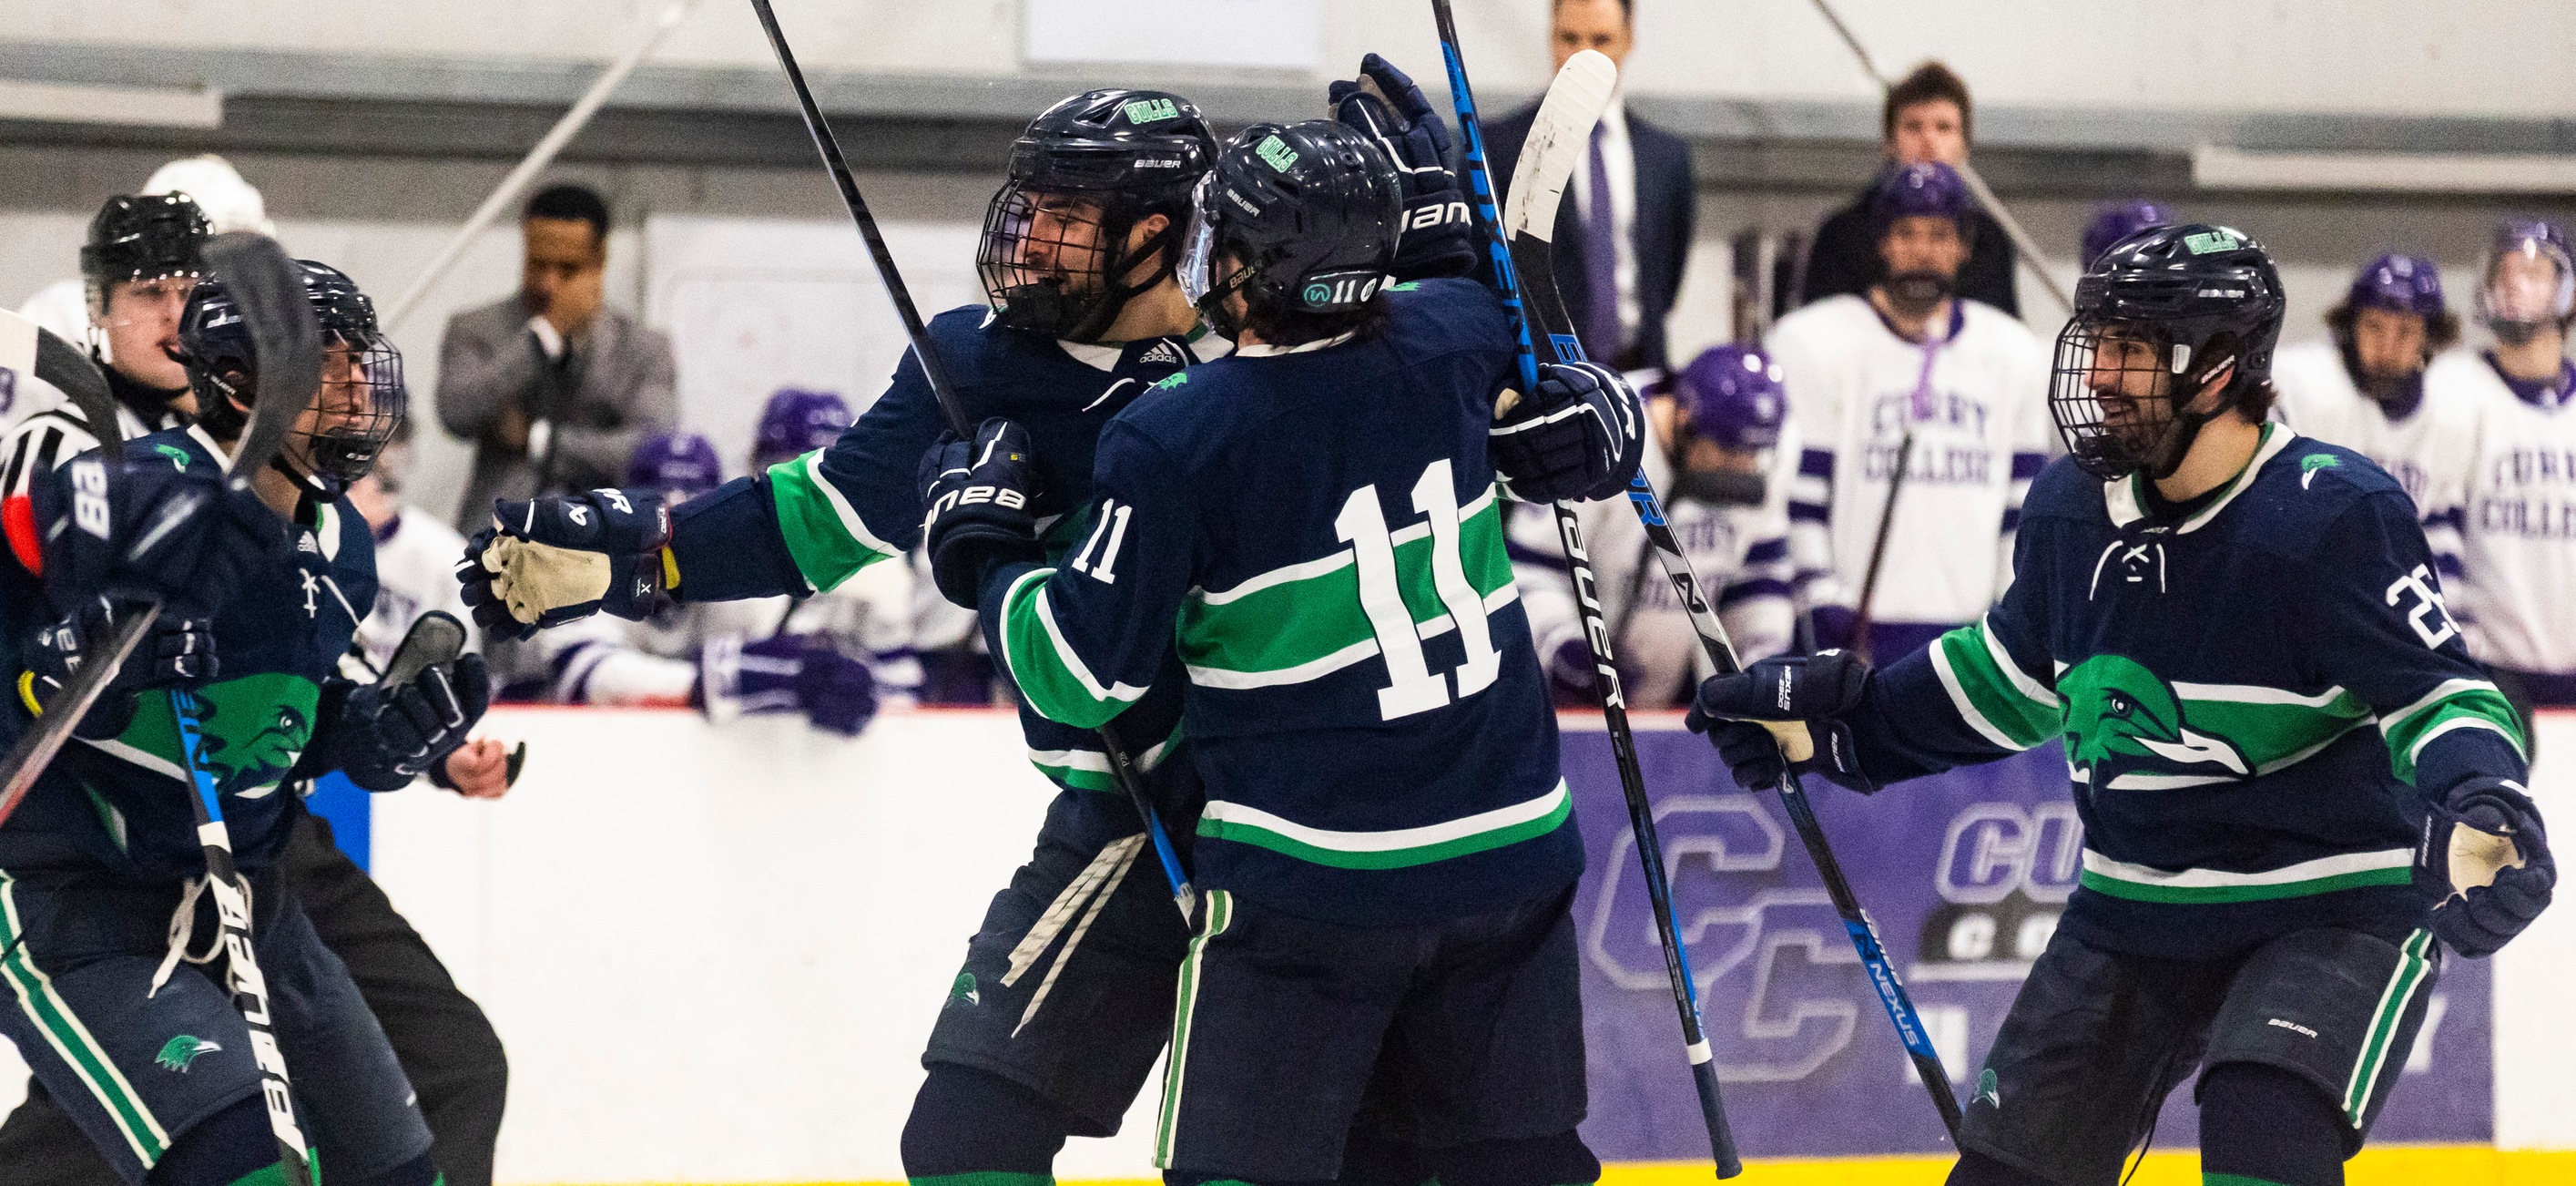 No. 3 Endicott Tops No. 6 Curry In D3Hockey Instant Classic Shootout Win